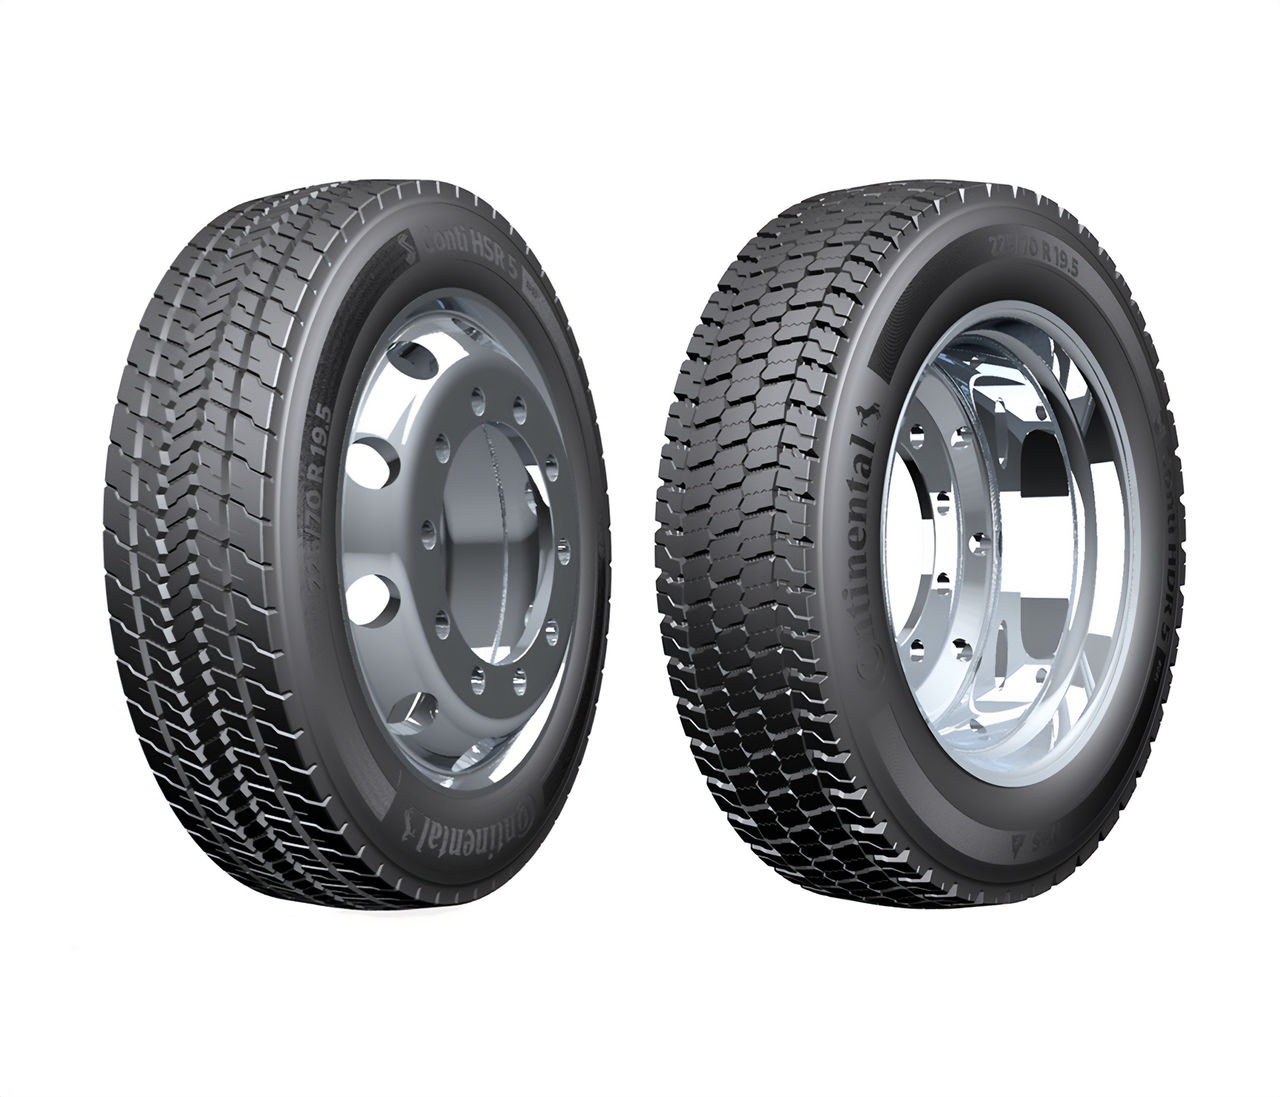 Continental Introduces Generation 5 Regional Truck Tires and New Winter Tire 